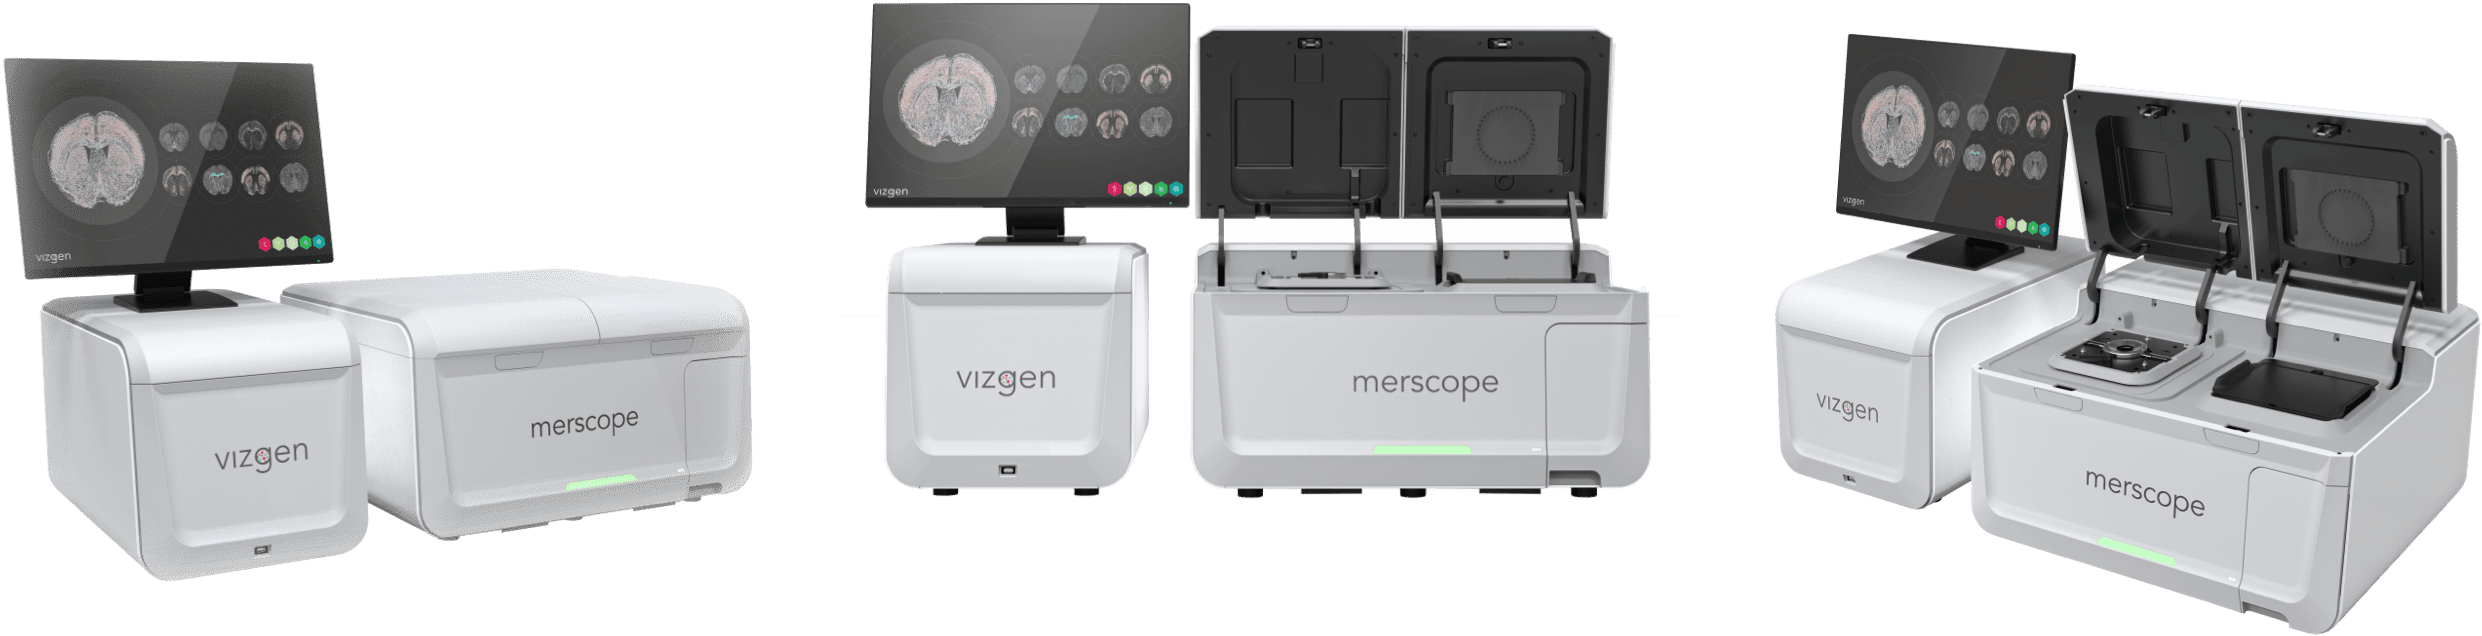 Vizgen’s MERSCOPE Instrument, from 3 angles. The instrument is a combination of the MERSCOPE Imaging Box MERSCOPE Control Box, and a touchscreen monitor.